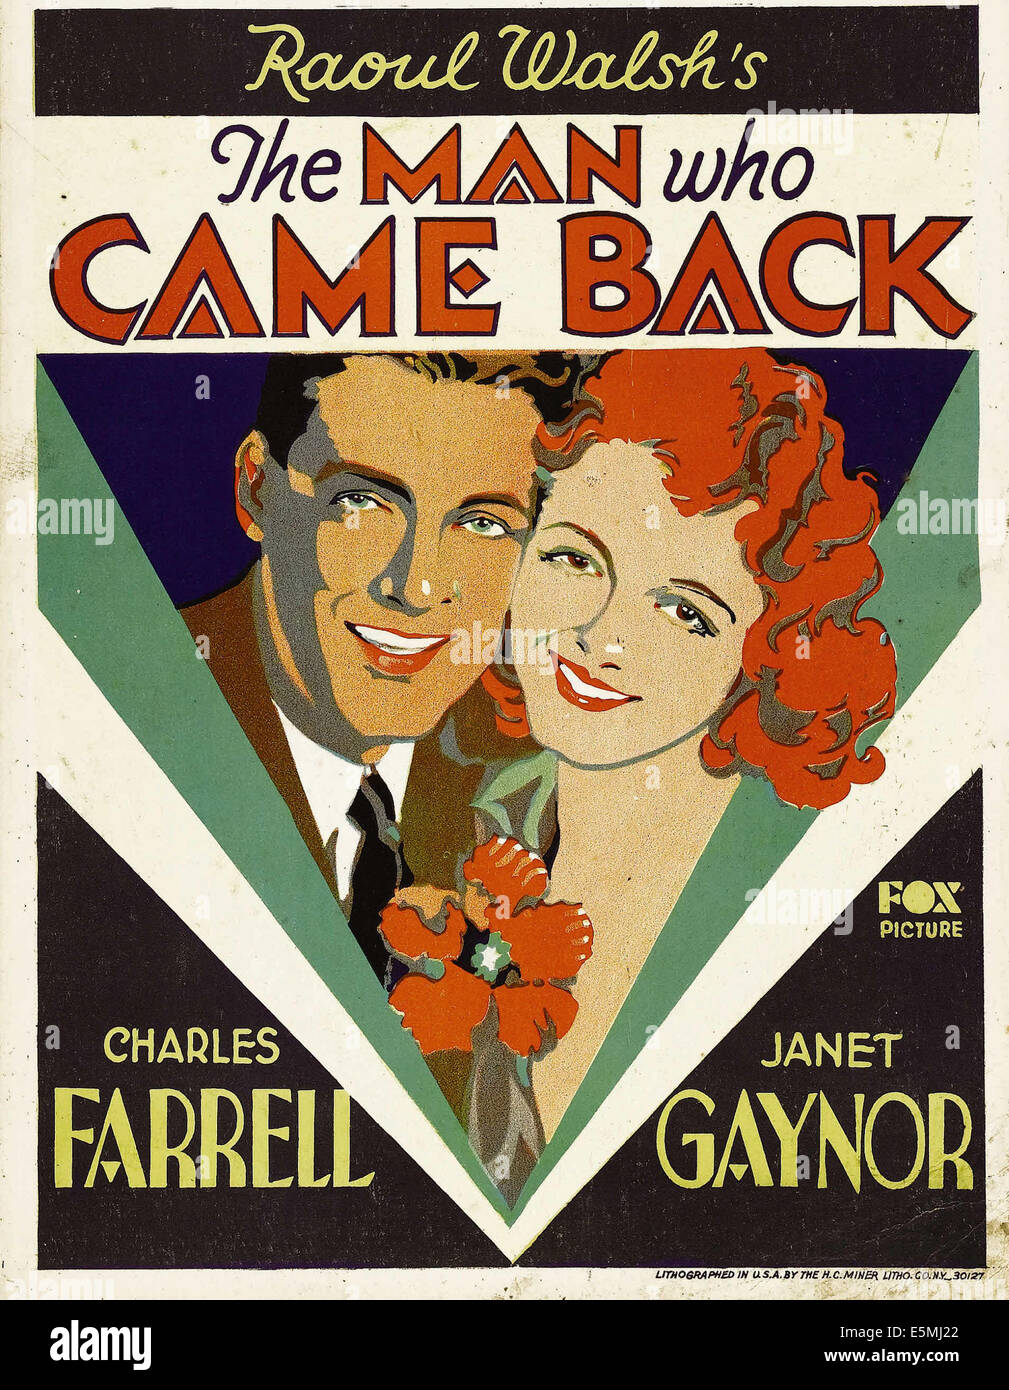 Image result for charles farrell and janet gaynor in the man who came back